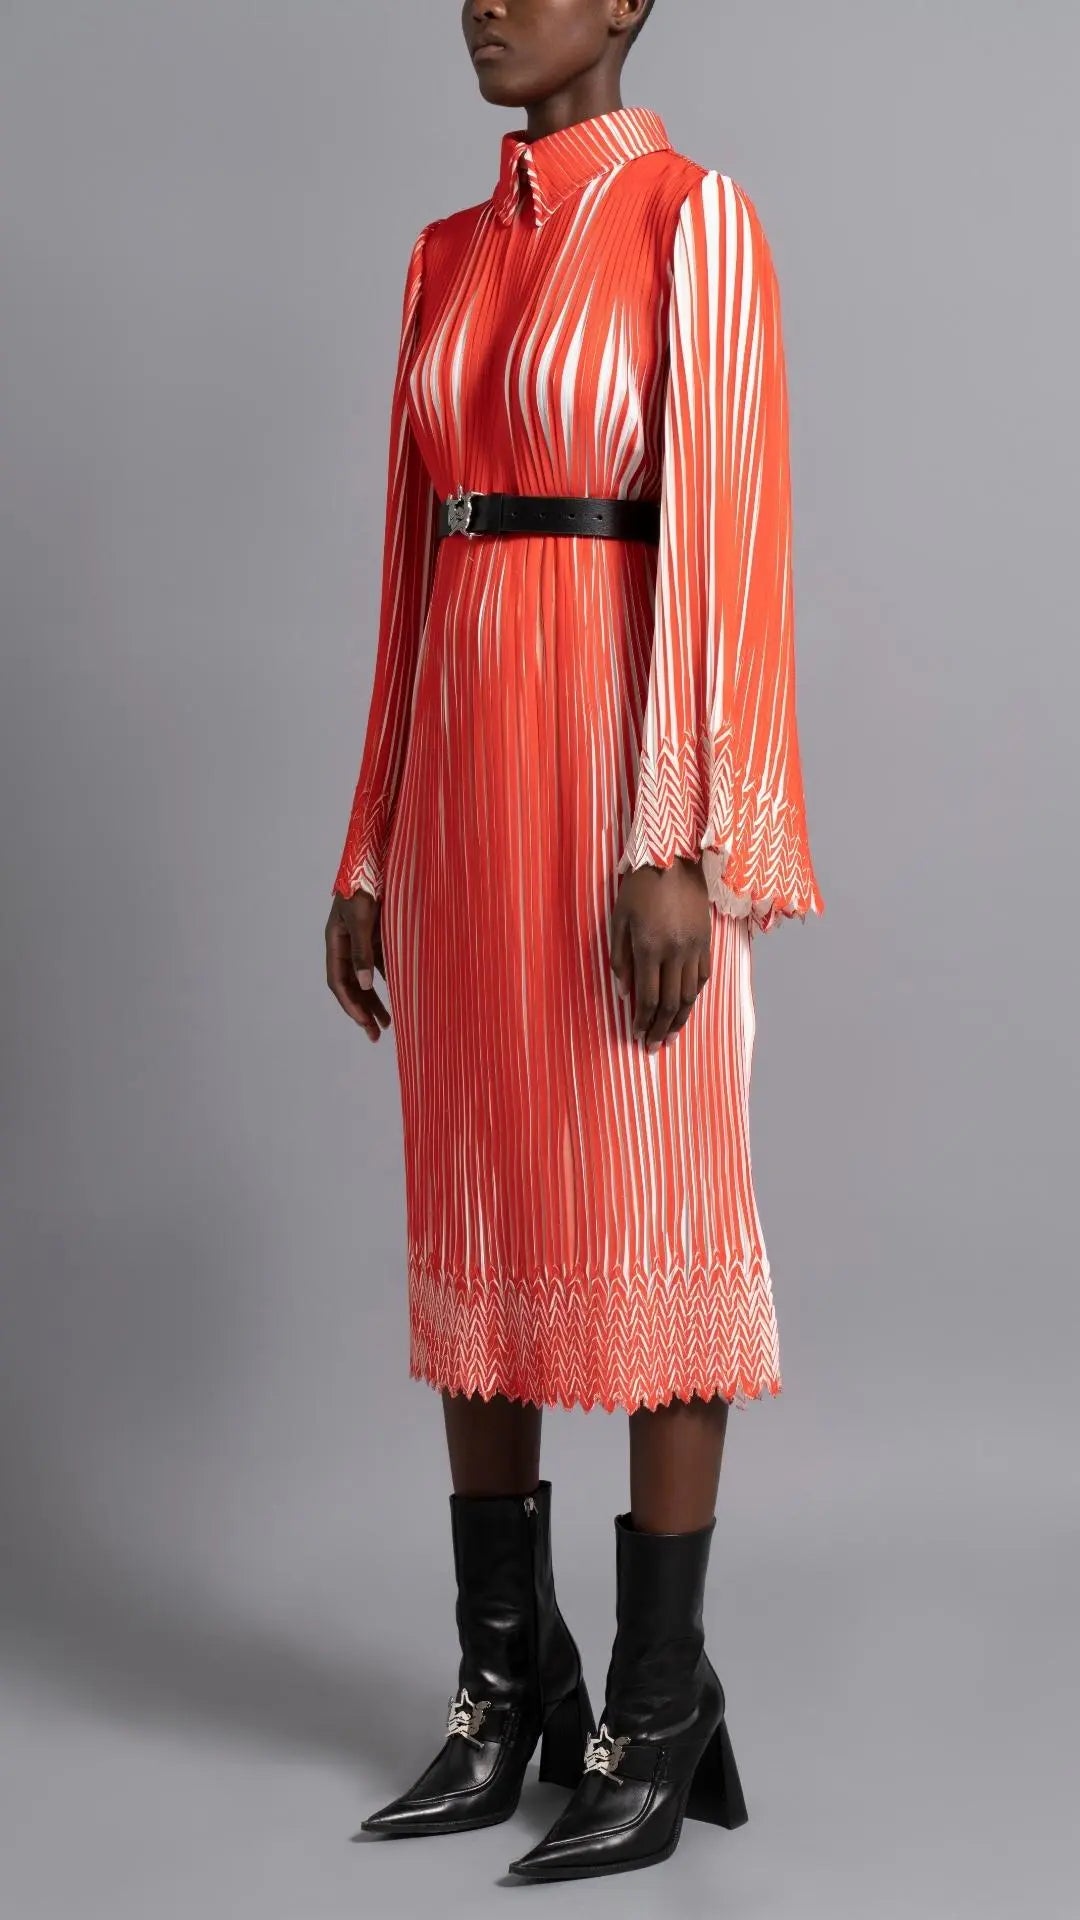 Thebe Magugu Chevron Pleated Dress. Stunning tomato red and white pleated dress with a collar, fitted waist and double chevron hem at the sleeves. It features a hidden zipper in the back. Shown on model facing to the side..